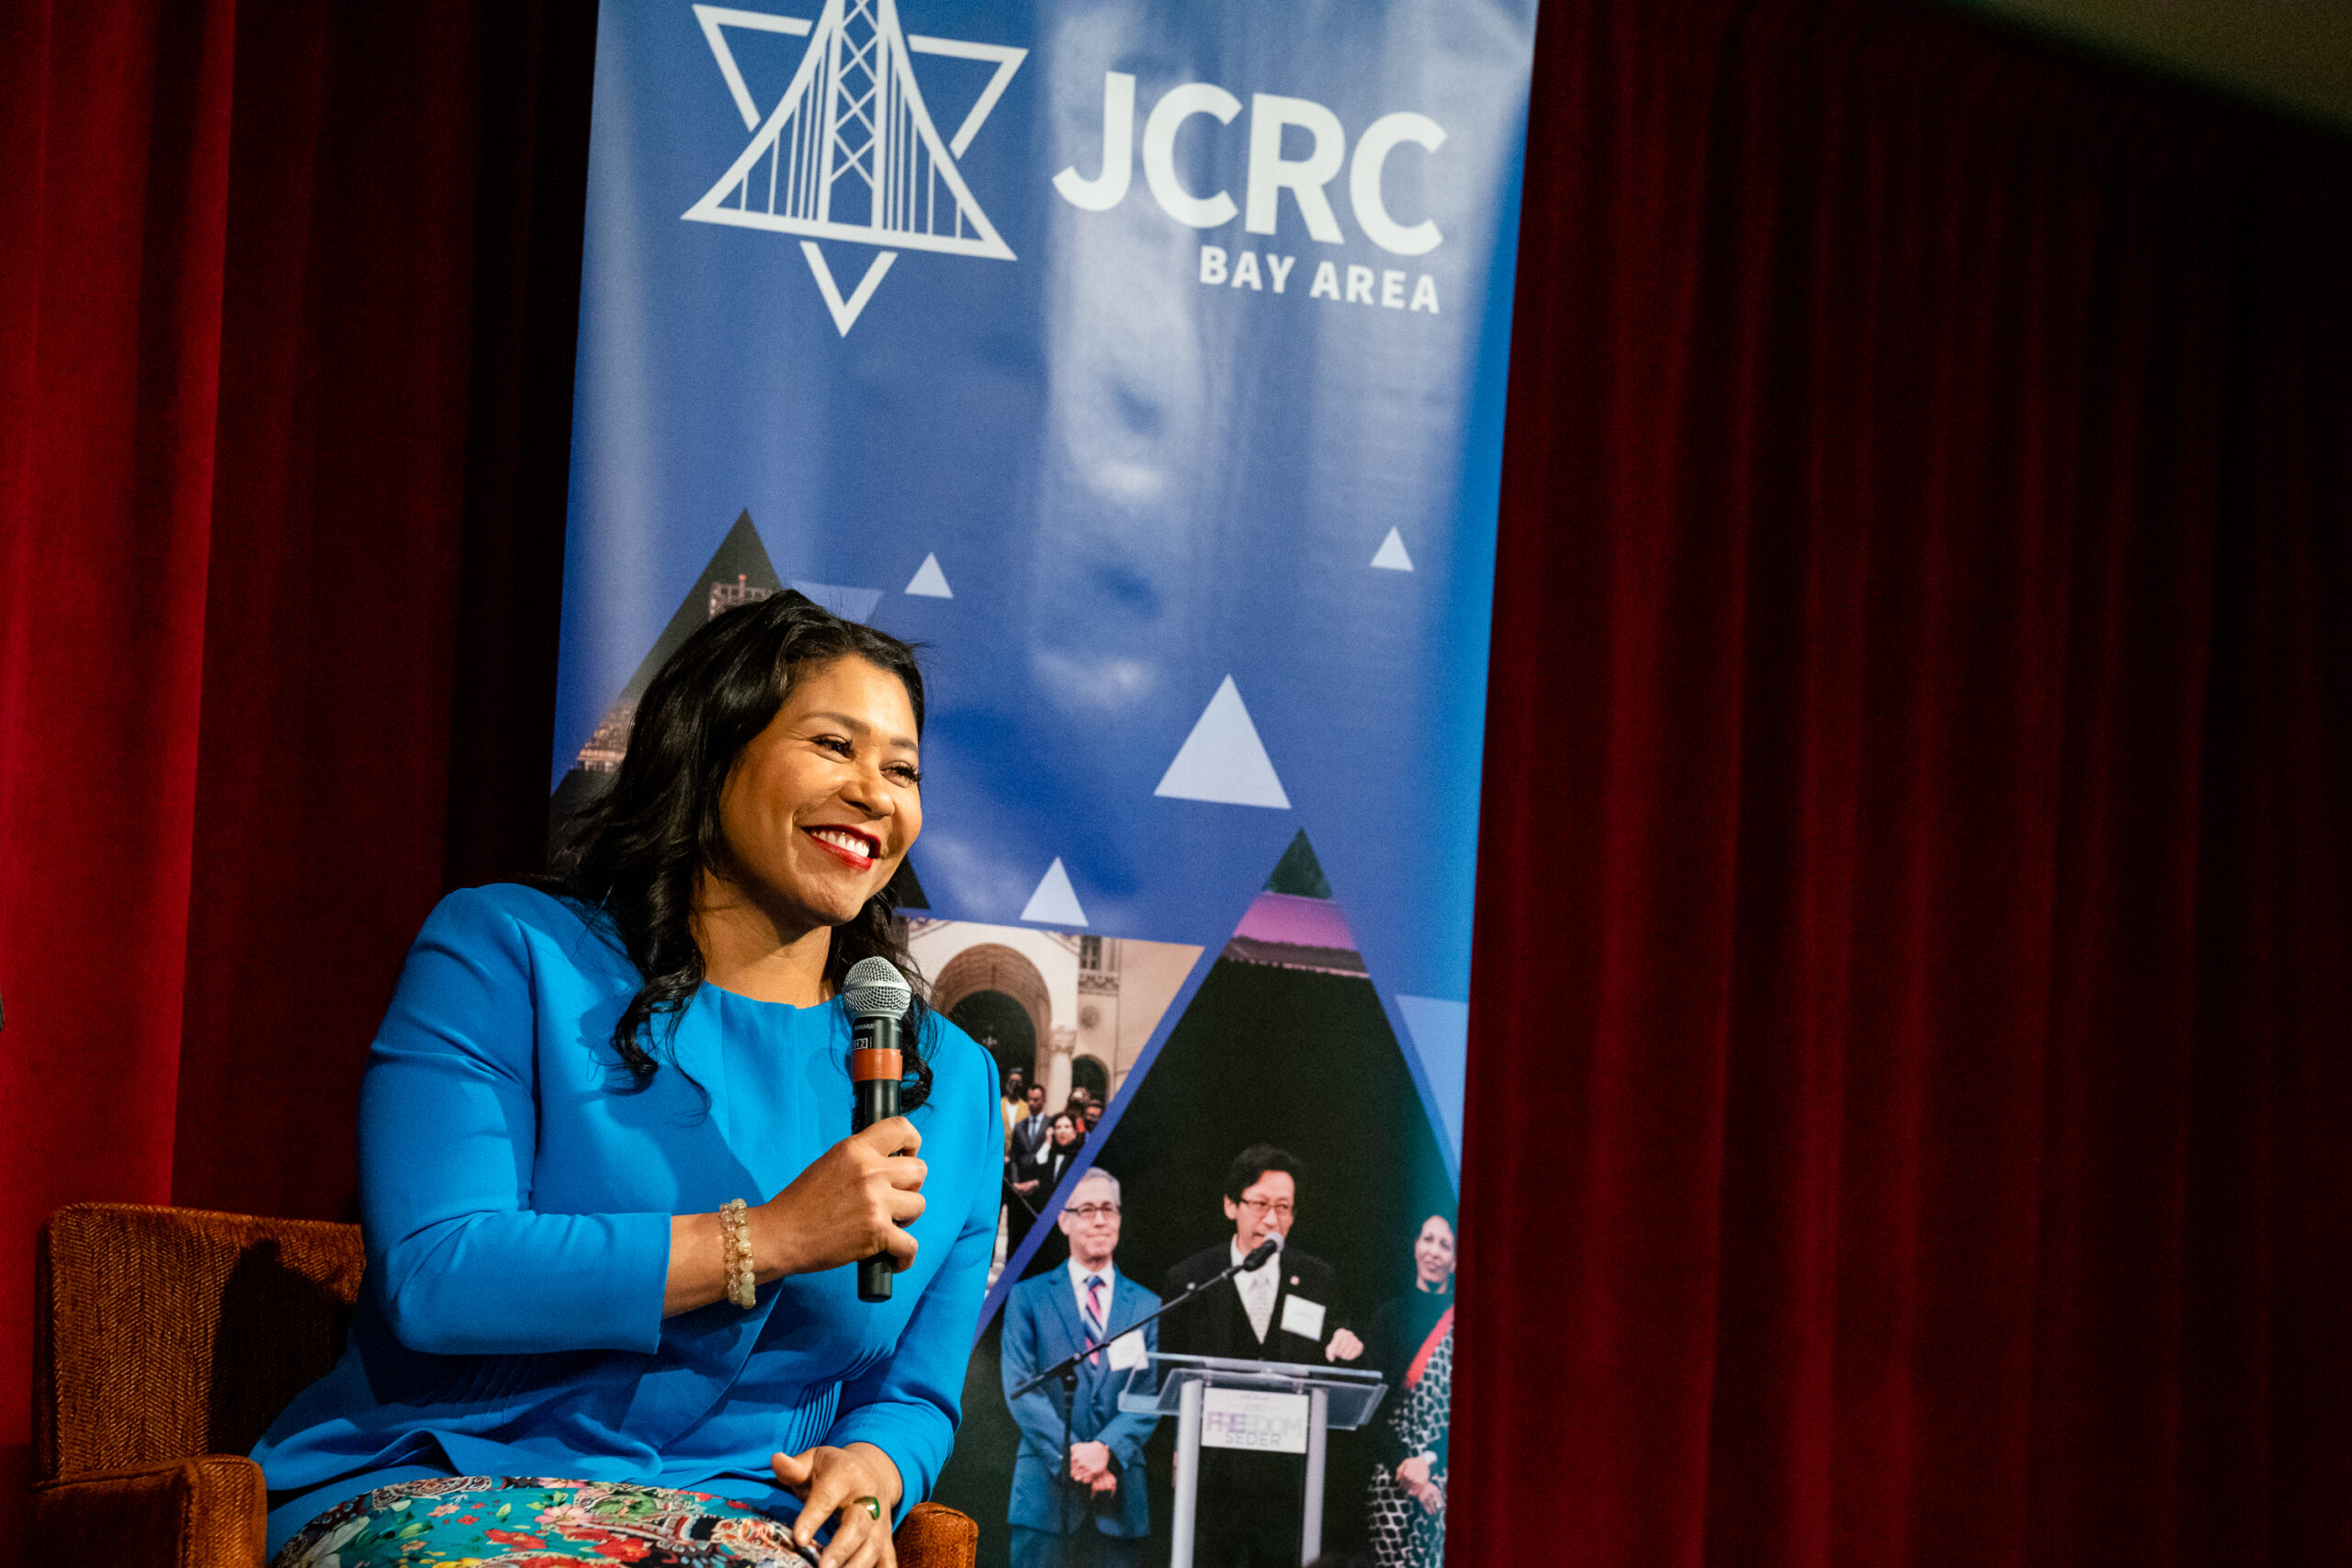 Mayor London Breed, wearing a blue dress, smiles and speaks into a microphone while seated by a banner of the JCRC Bay Area.